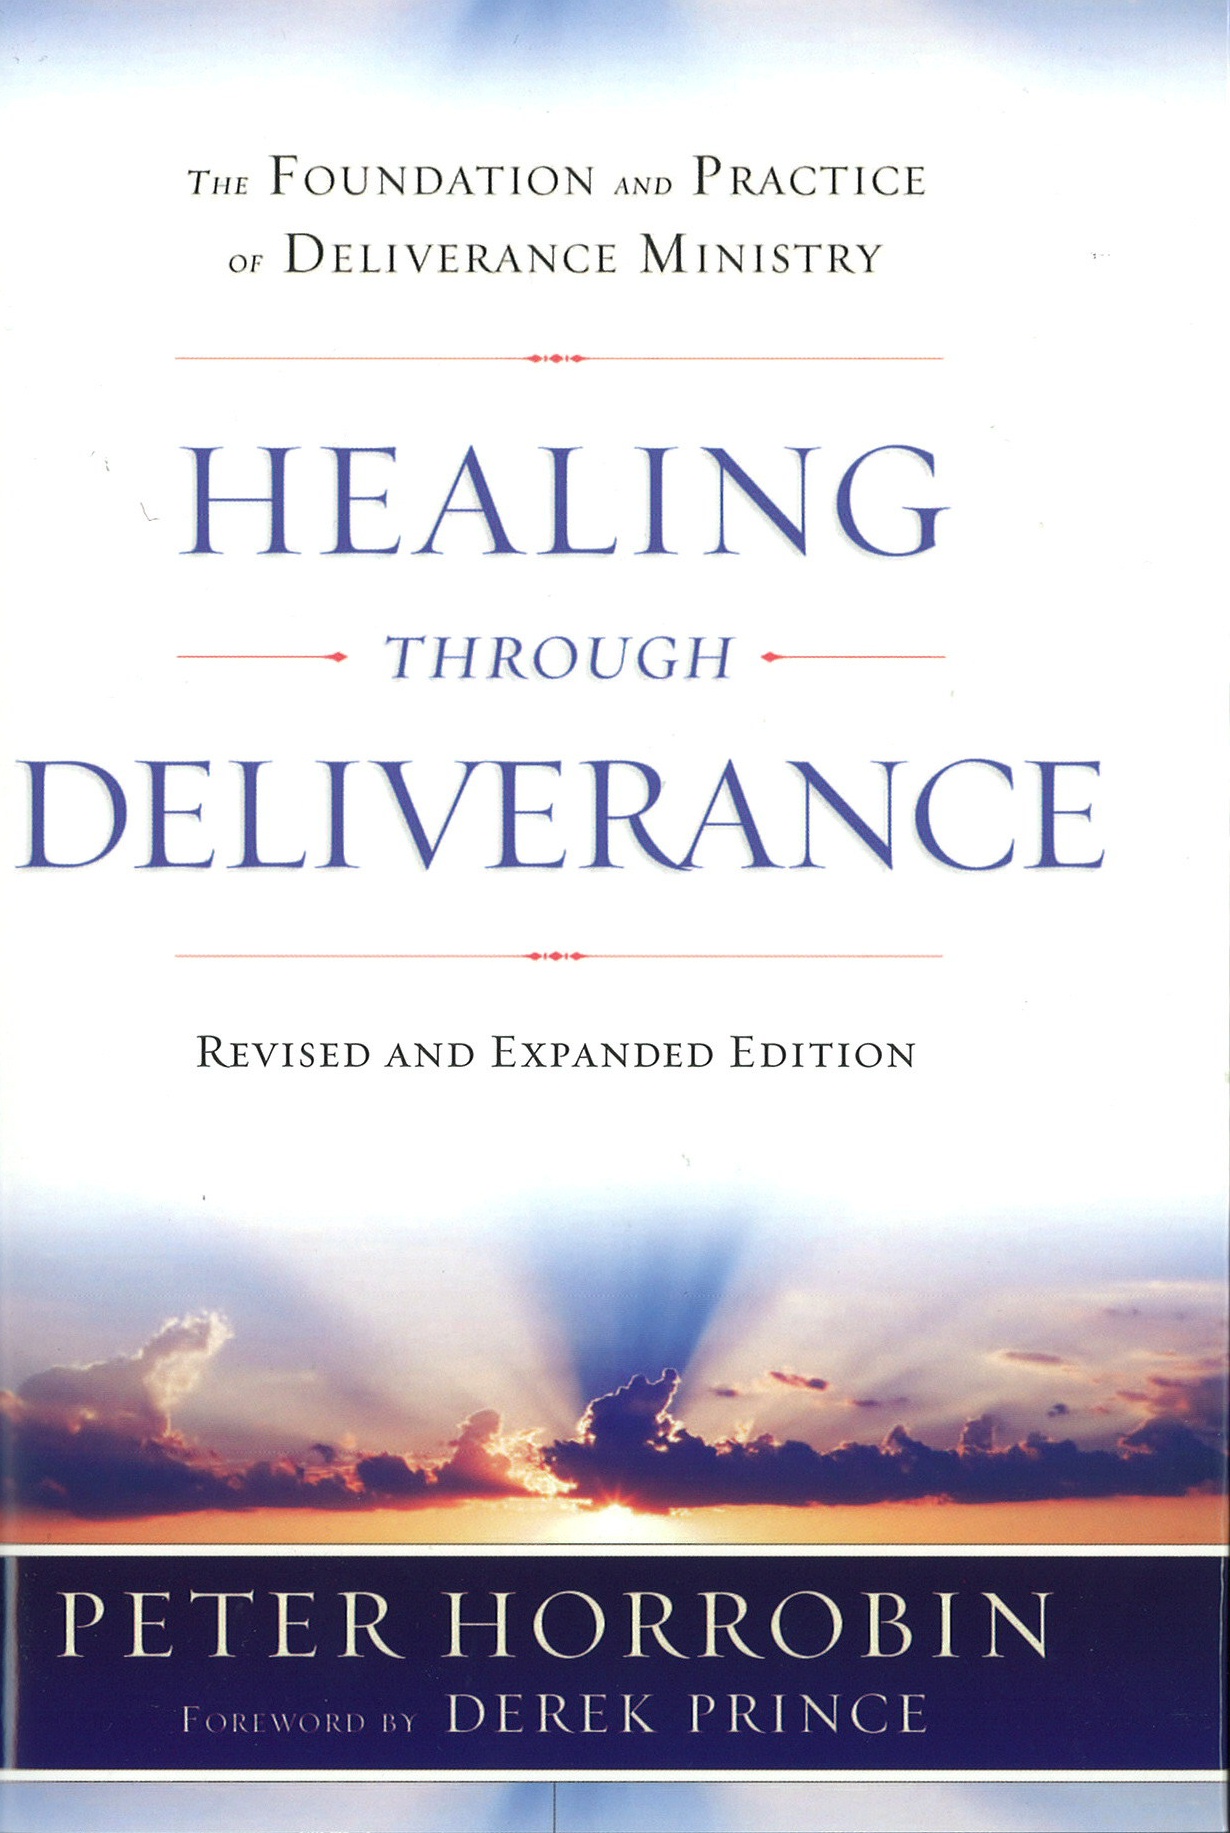 Healing Through Deliverance - The Foundation and Practice of Deliverance Ministry